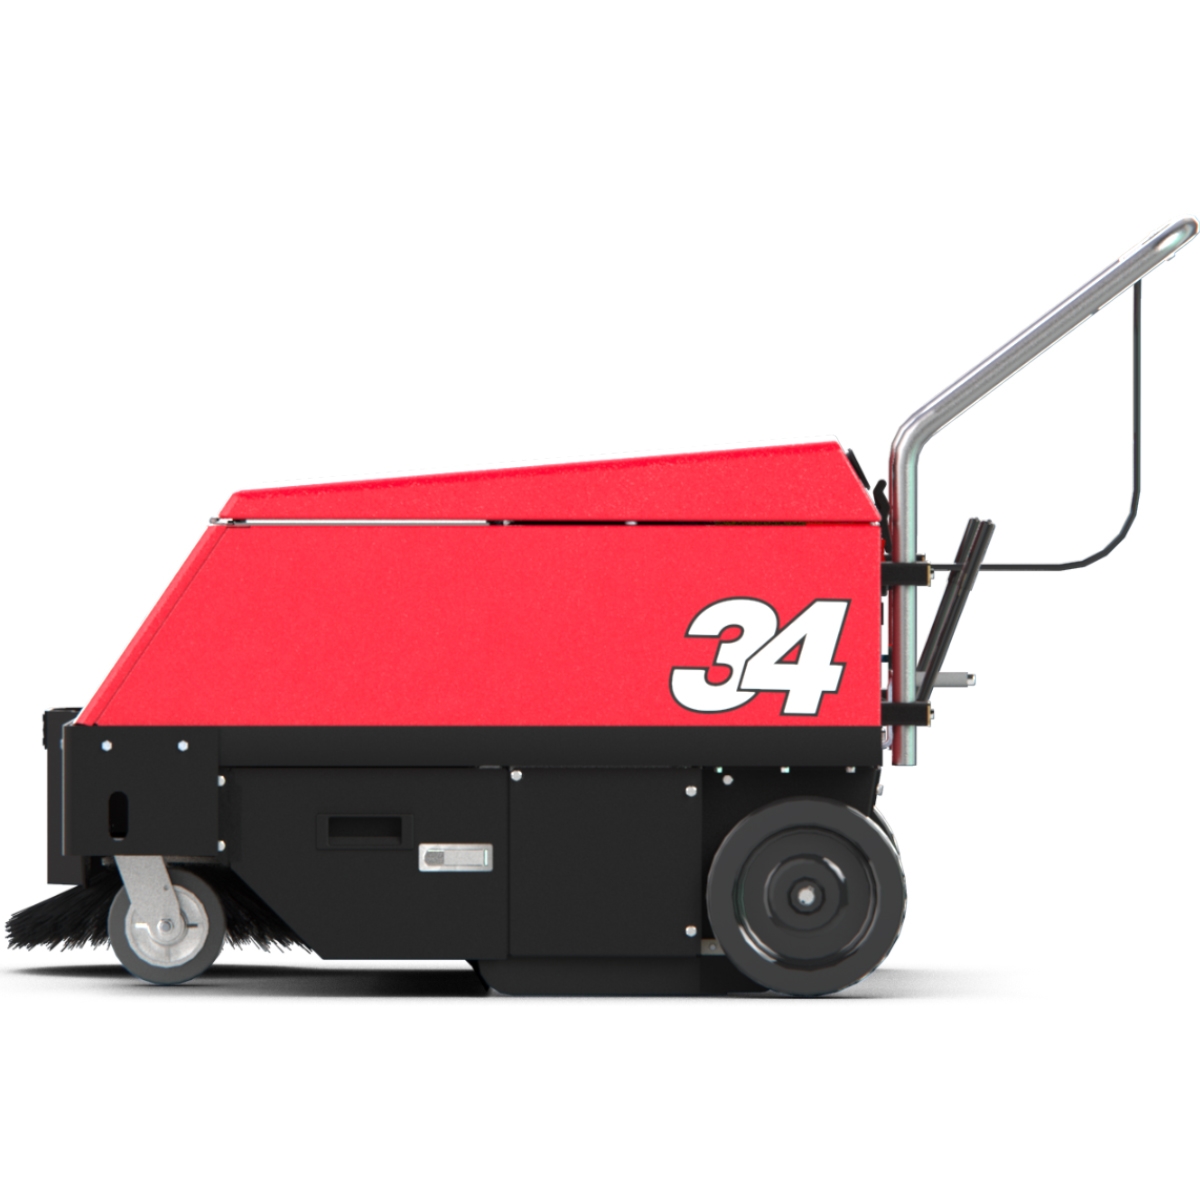 The Factory Cat model 34 Walk Behind Sweeper is the machine that built our company. This is an Industrial Sweeper that is famous for its ability to survive decades in the harshest applications: including mines, brick manufacturing, and rugged steel mills.